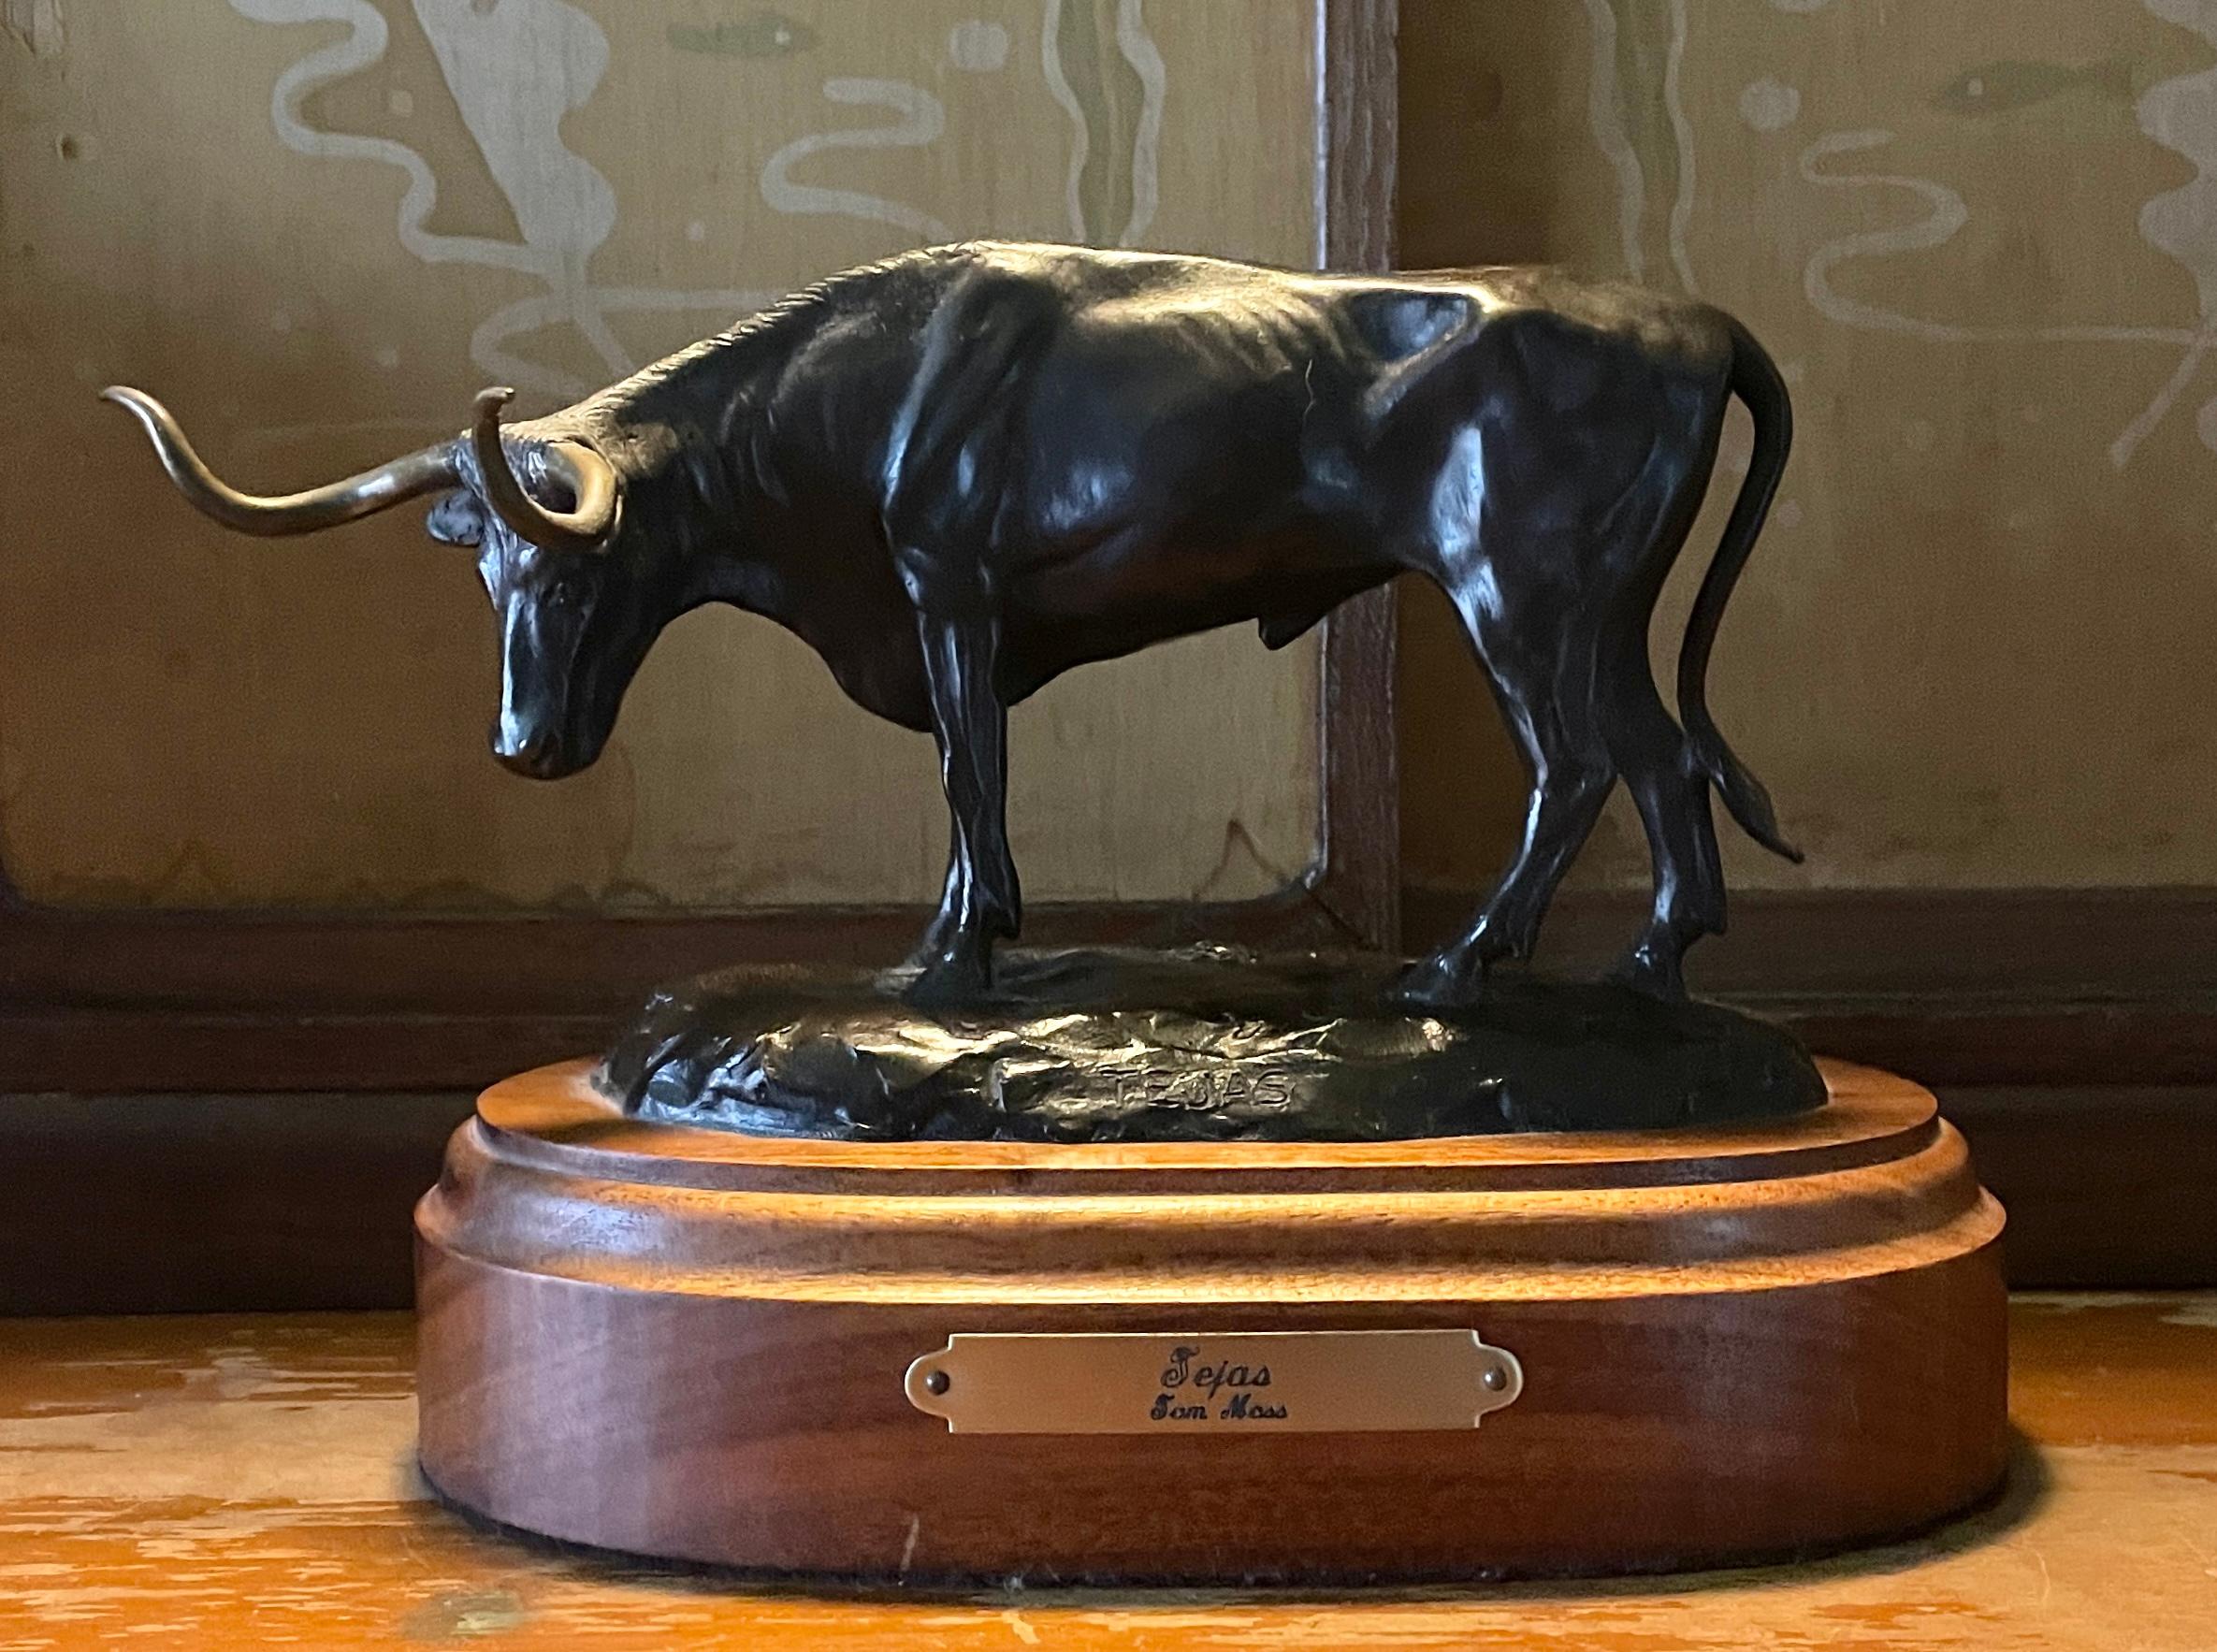 Tom Moss (American, b. 1936) 
'TEJAS' Bronze Steer Bull on wooden base
W 9 x D 4.5 x H 6 in
Total Wt. 4 lbs. 11 oz.
Inscribed in front of bronze; TEJAS
Inscribed in rear of bronze; Tom Moss © 20/50